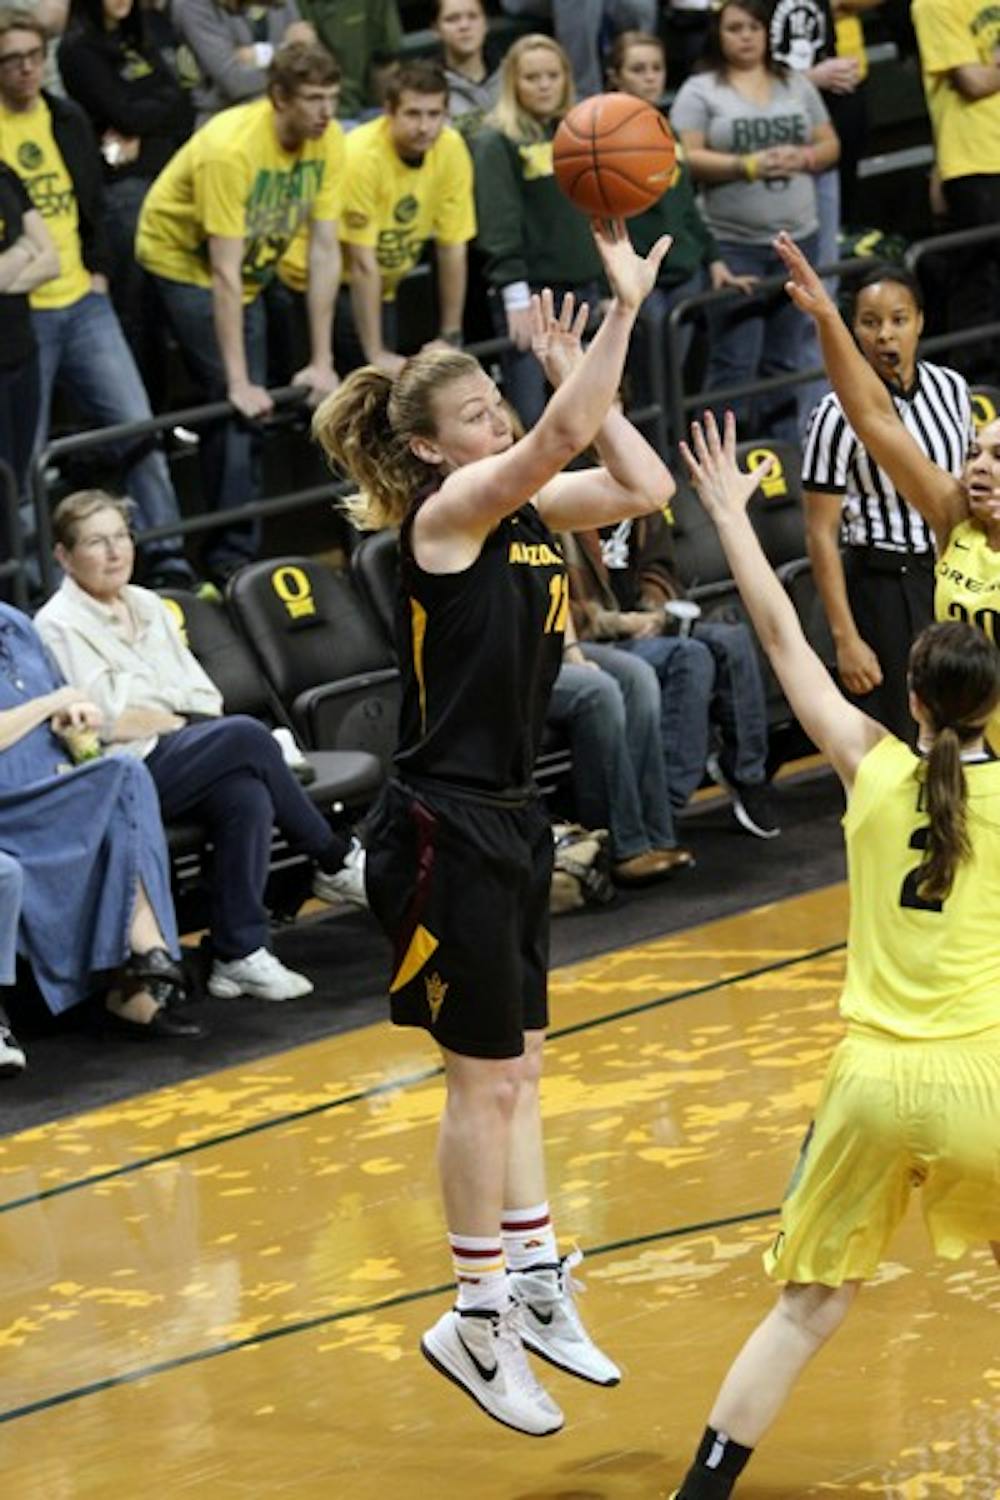 Senior forward Kali Bennett puts up a shot against Oregon on Saturday. Bennett finished with 14 points and 13 rebounds in a 53-49 victory over the Ducks. (Photo courtesy of Steve Rodriguez)